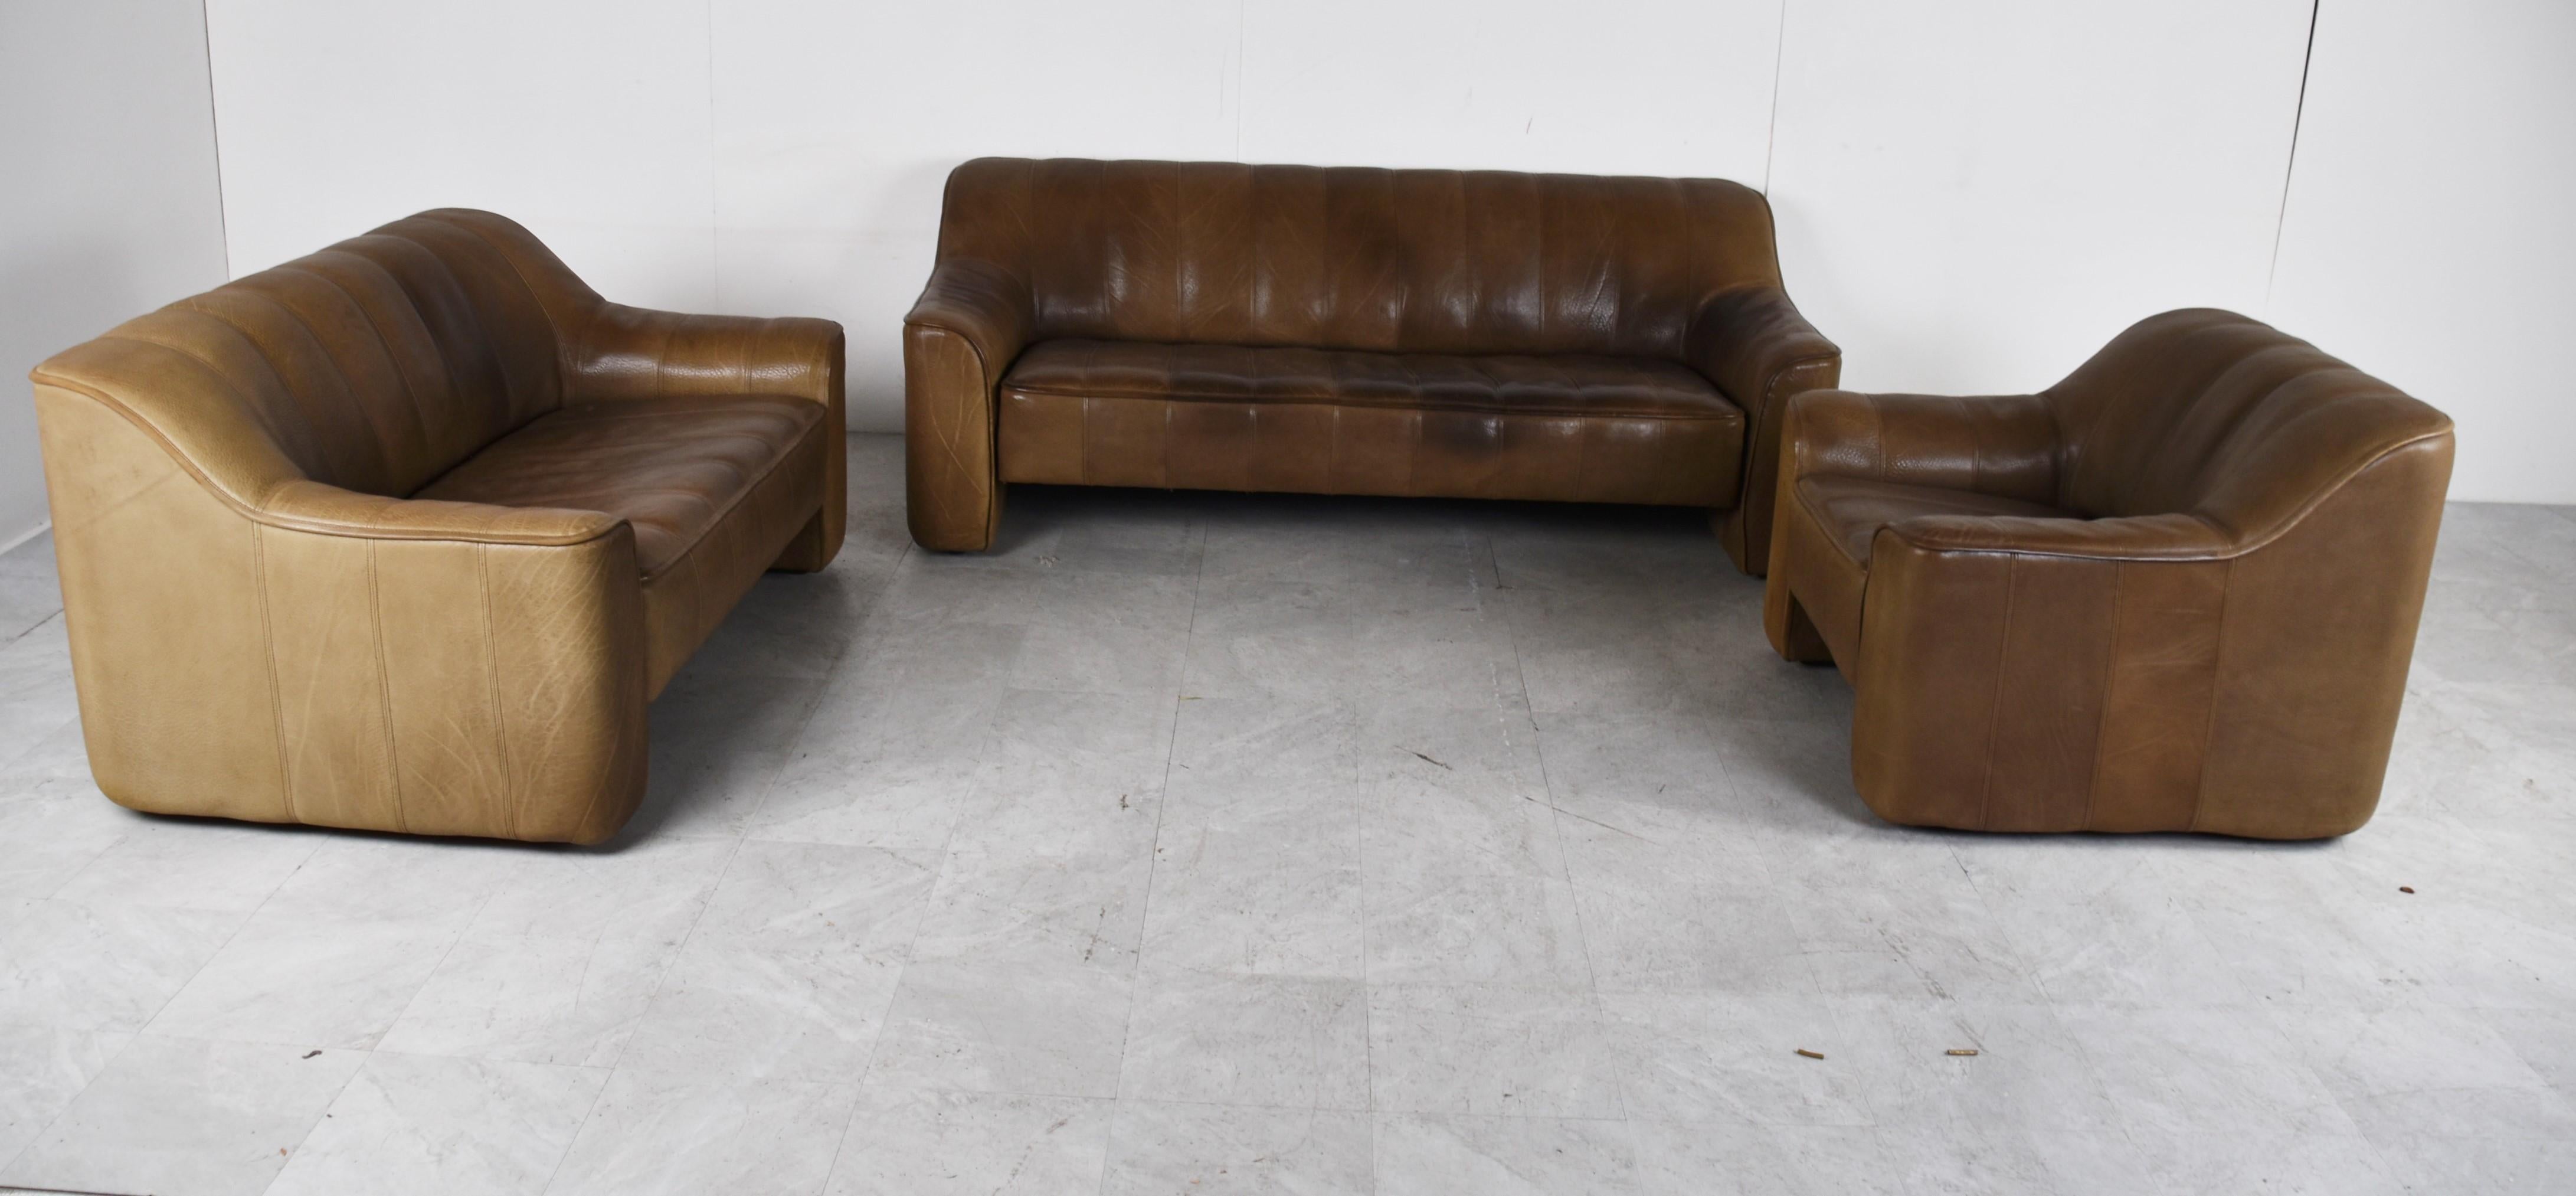 Set of gorgeous leather DS44 sofas from De Sede.

De Sede, renowned for using the best quality leather has created some wonderful sofas.

These are no exception and the beautiful, thick Neck leather will be ever lasting.

Combined with the curvy